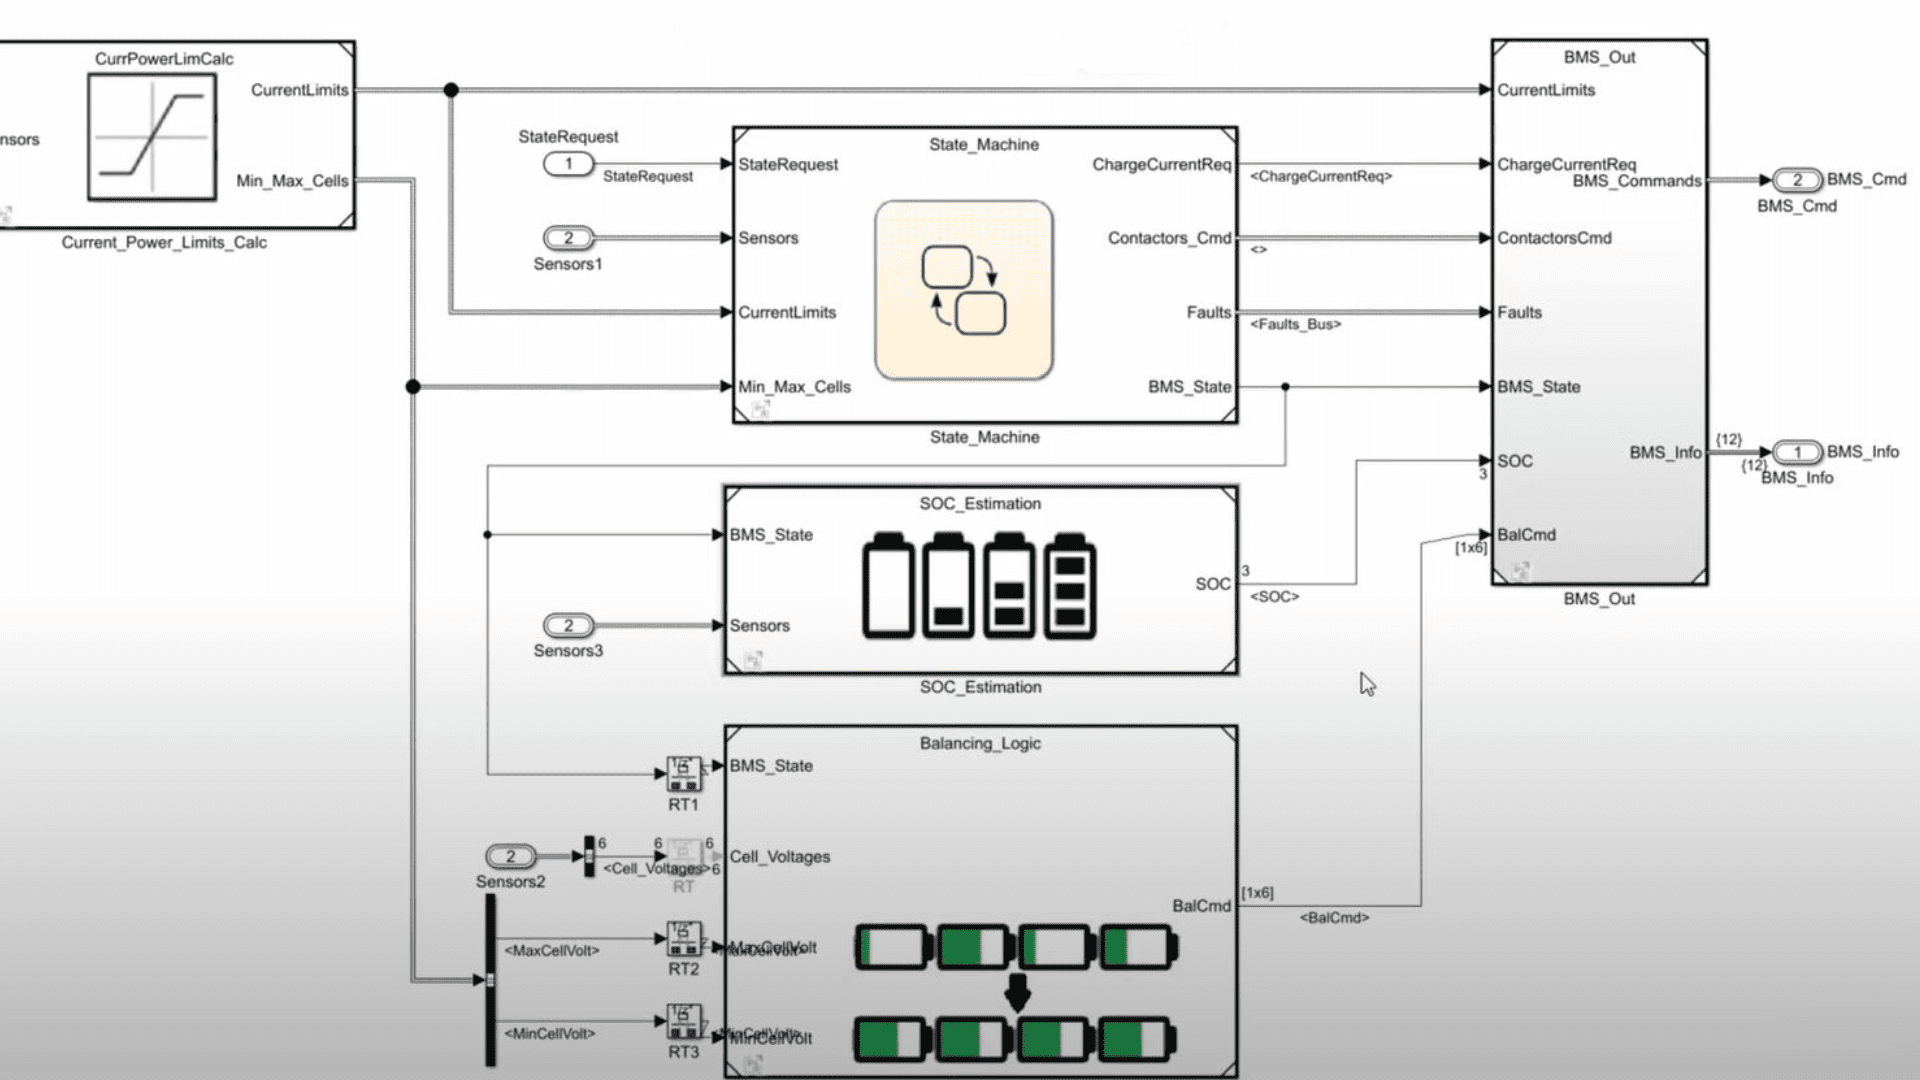 Battery Management Systems development with Simulink